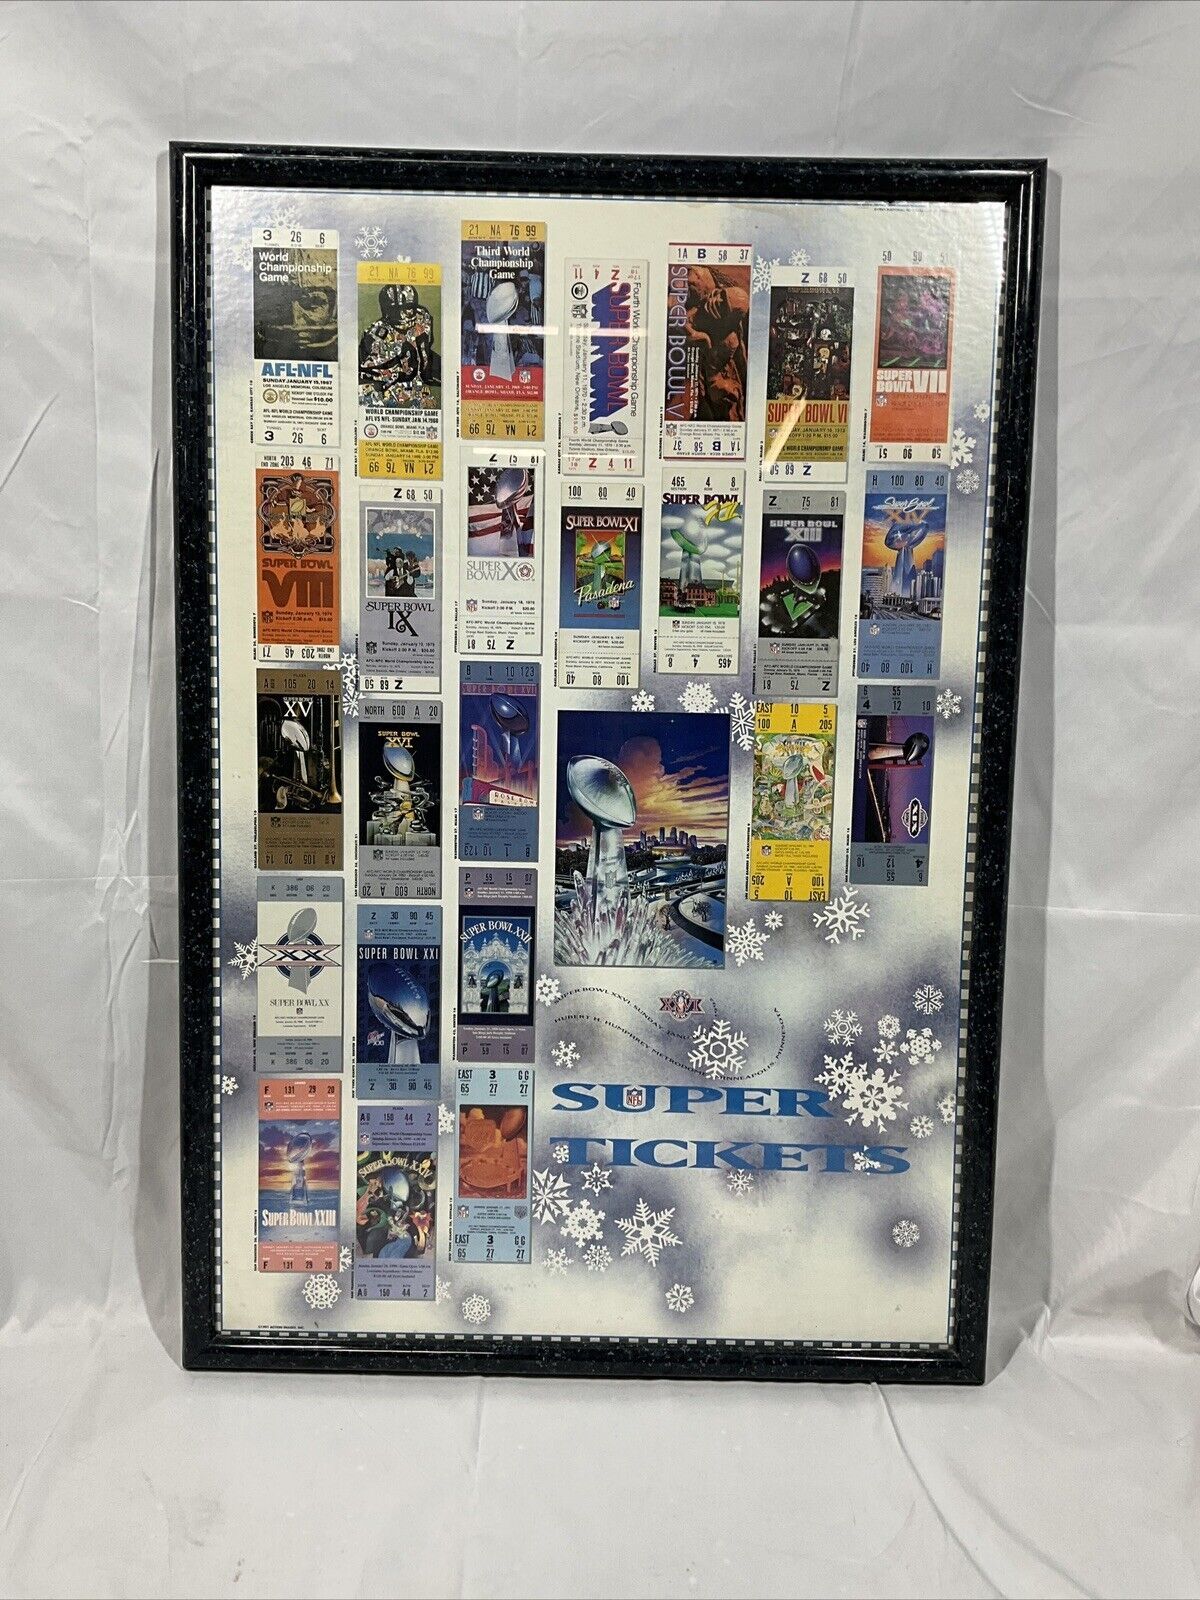 1992 Super Bowl Tickets Poster Shows Tickets 1967-1991